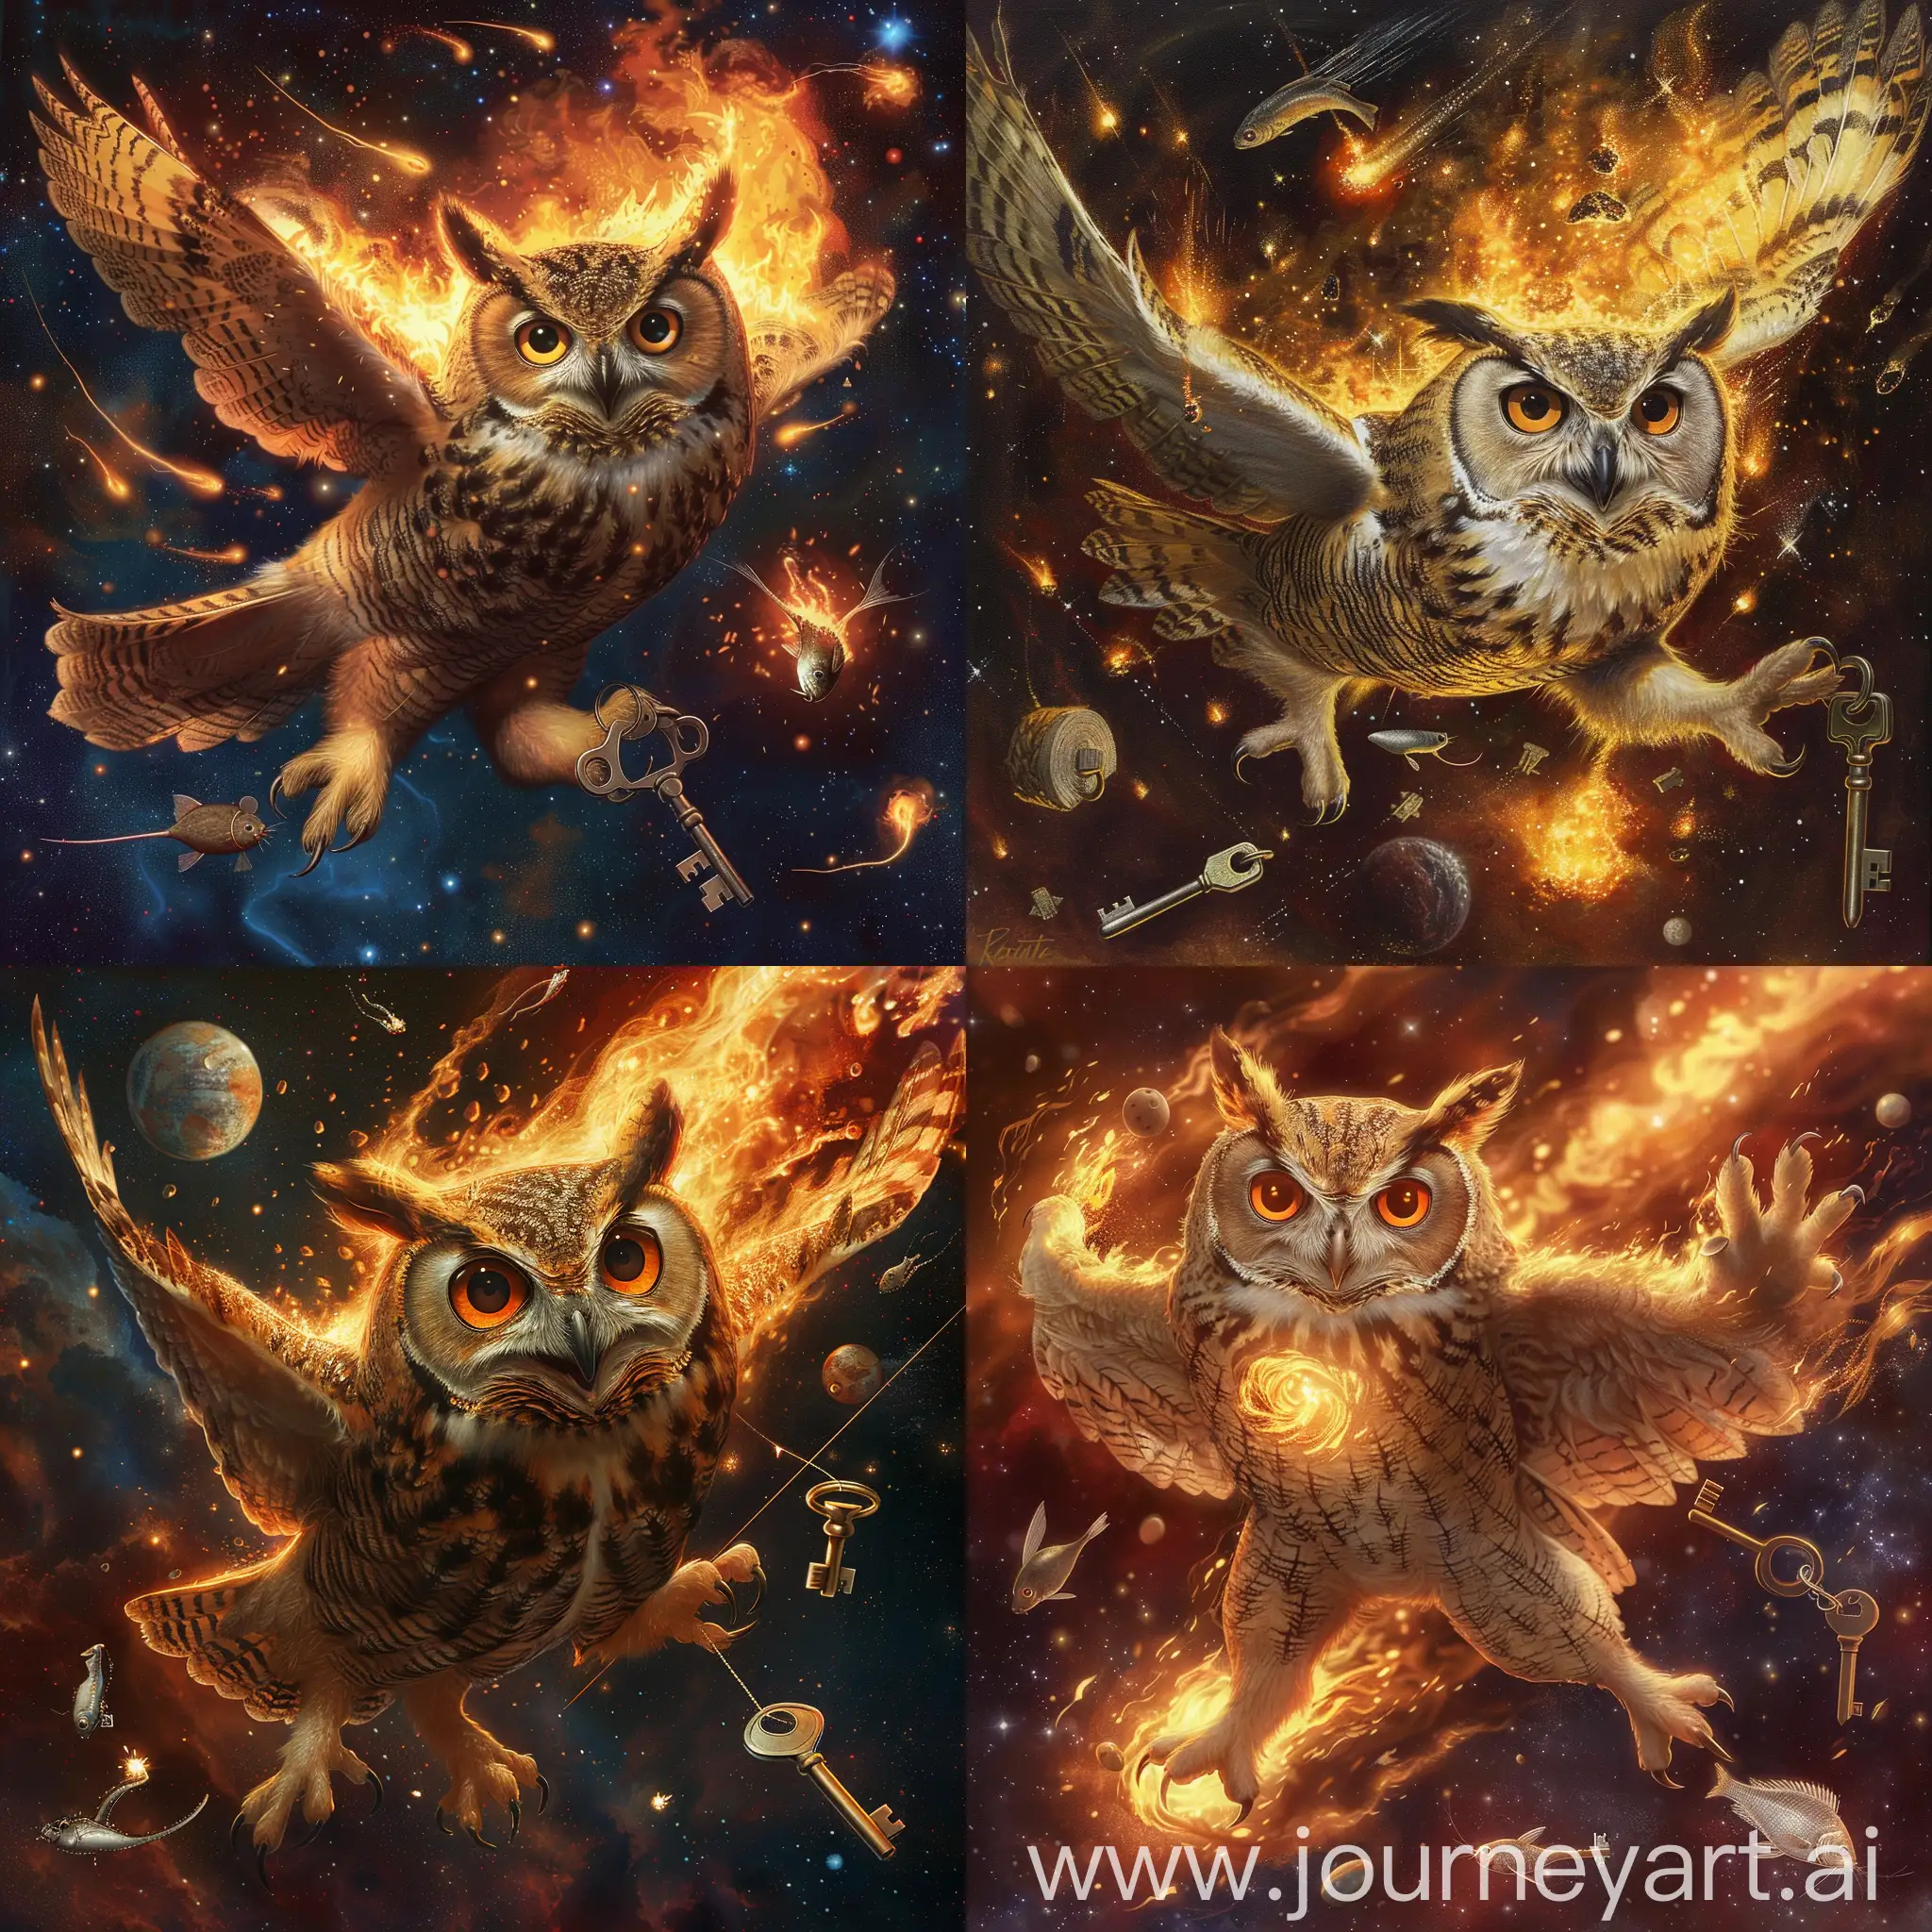 Majestic-Owl-Soaring-Through-Fiery-Cosmos-with-Prey-and-Key